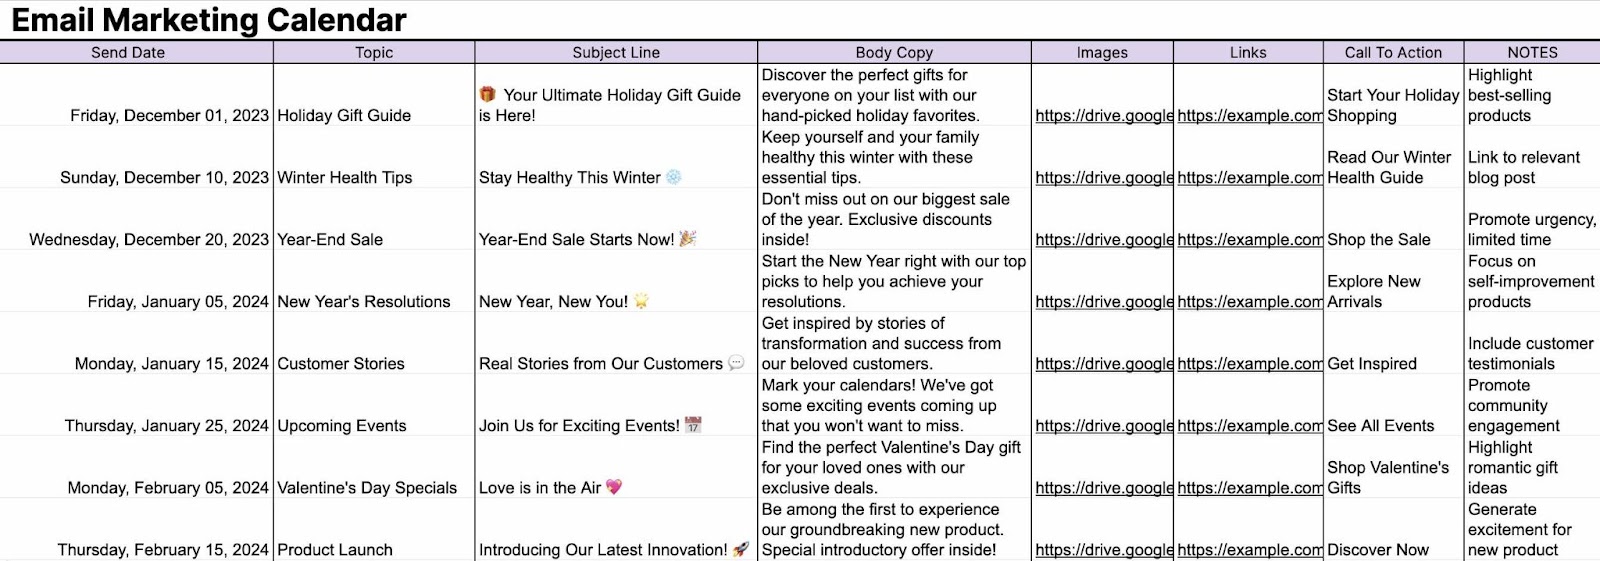 An email marketing content calendar example